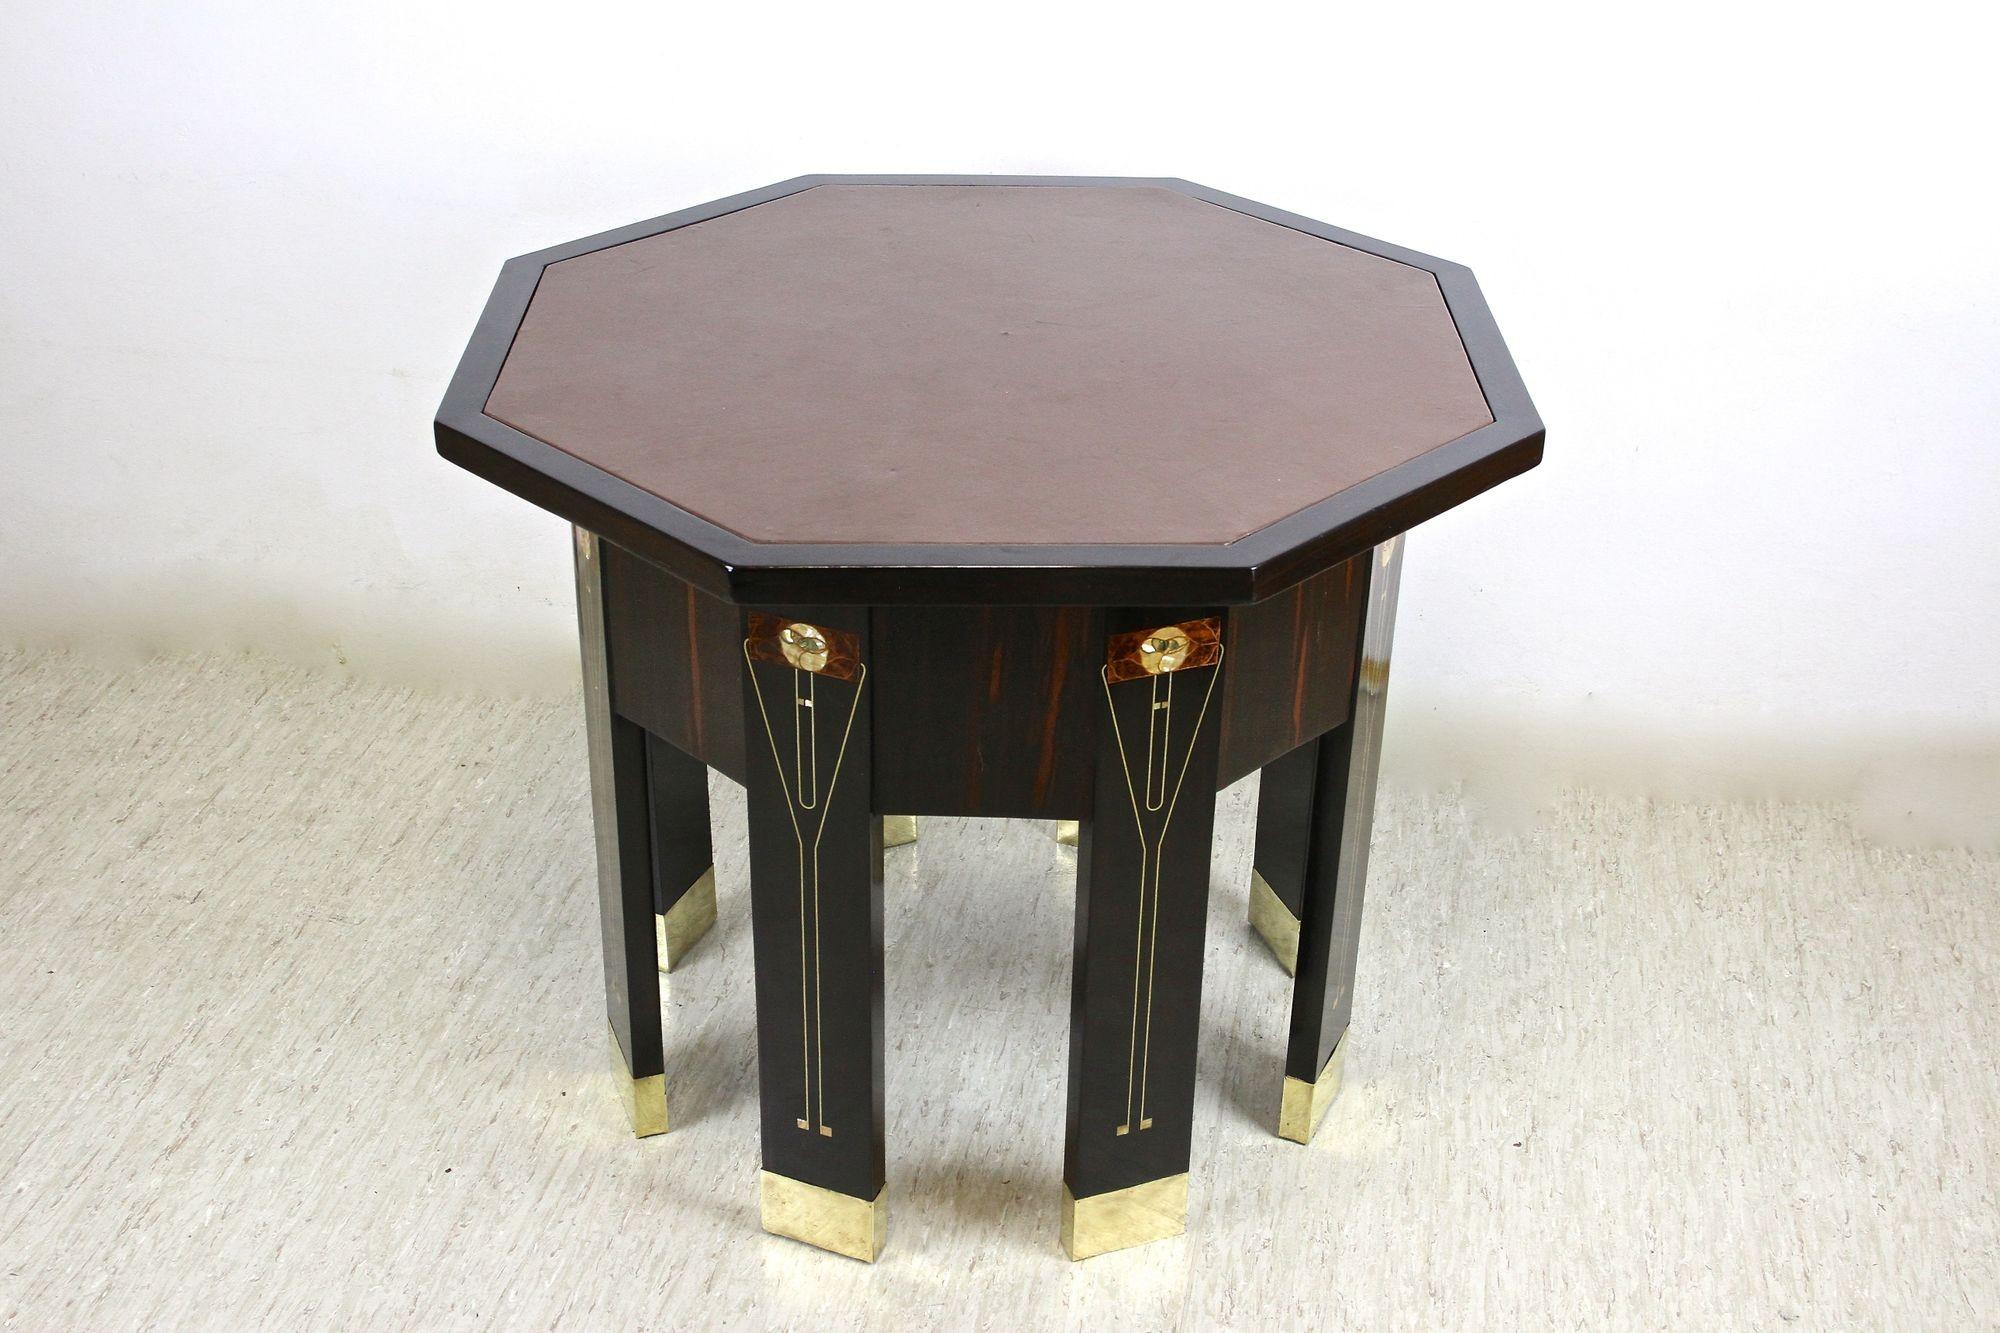 Art Nouveau Octagonal Palisander Table with Mother of Pearl Inlays, AT ca. 1905 For Sale 6